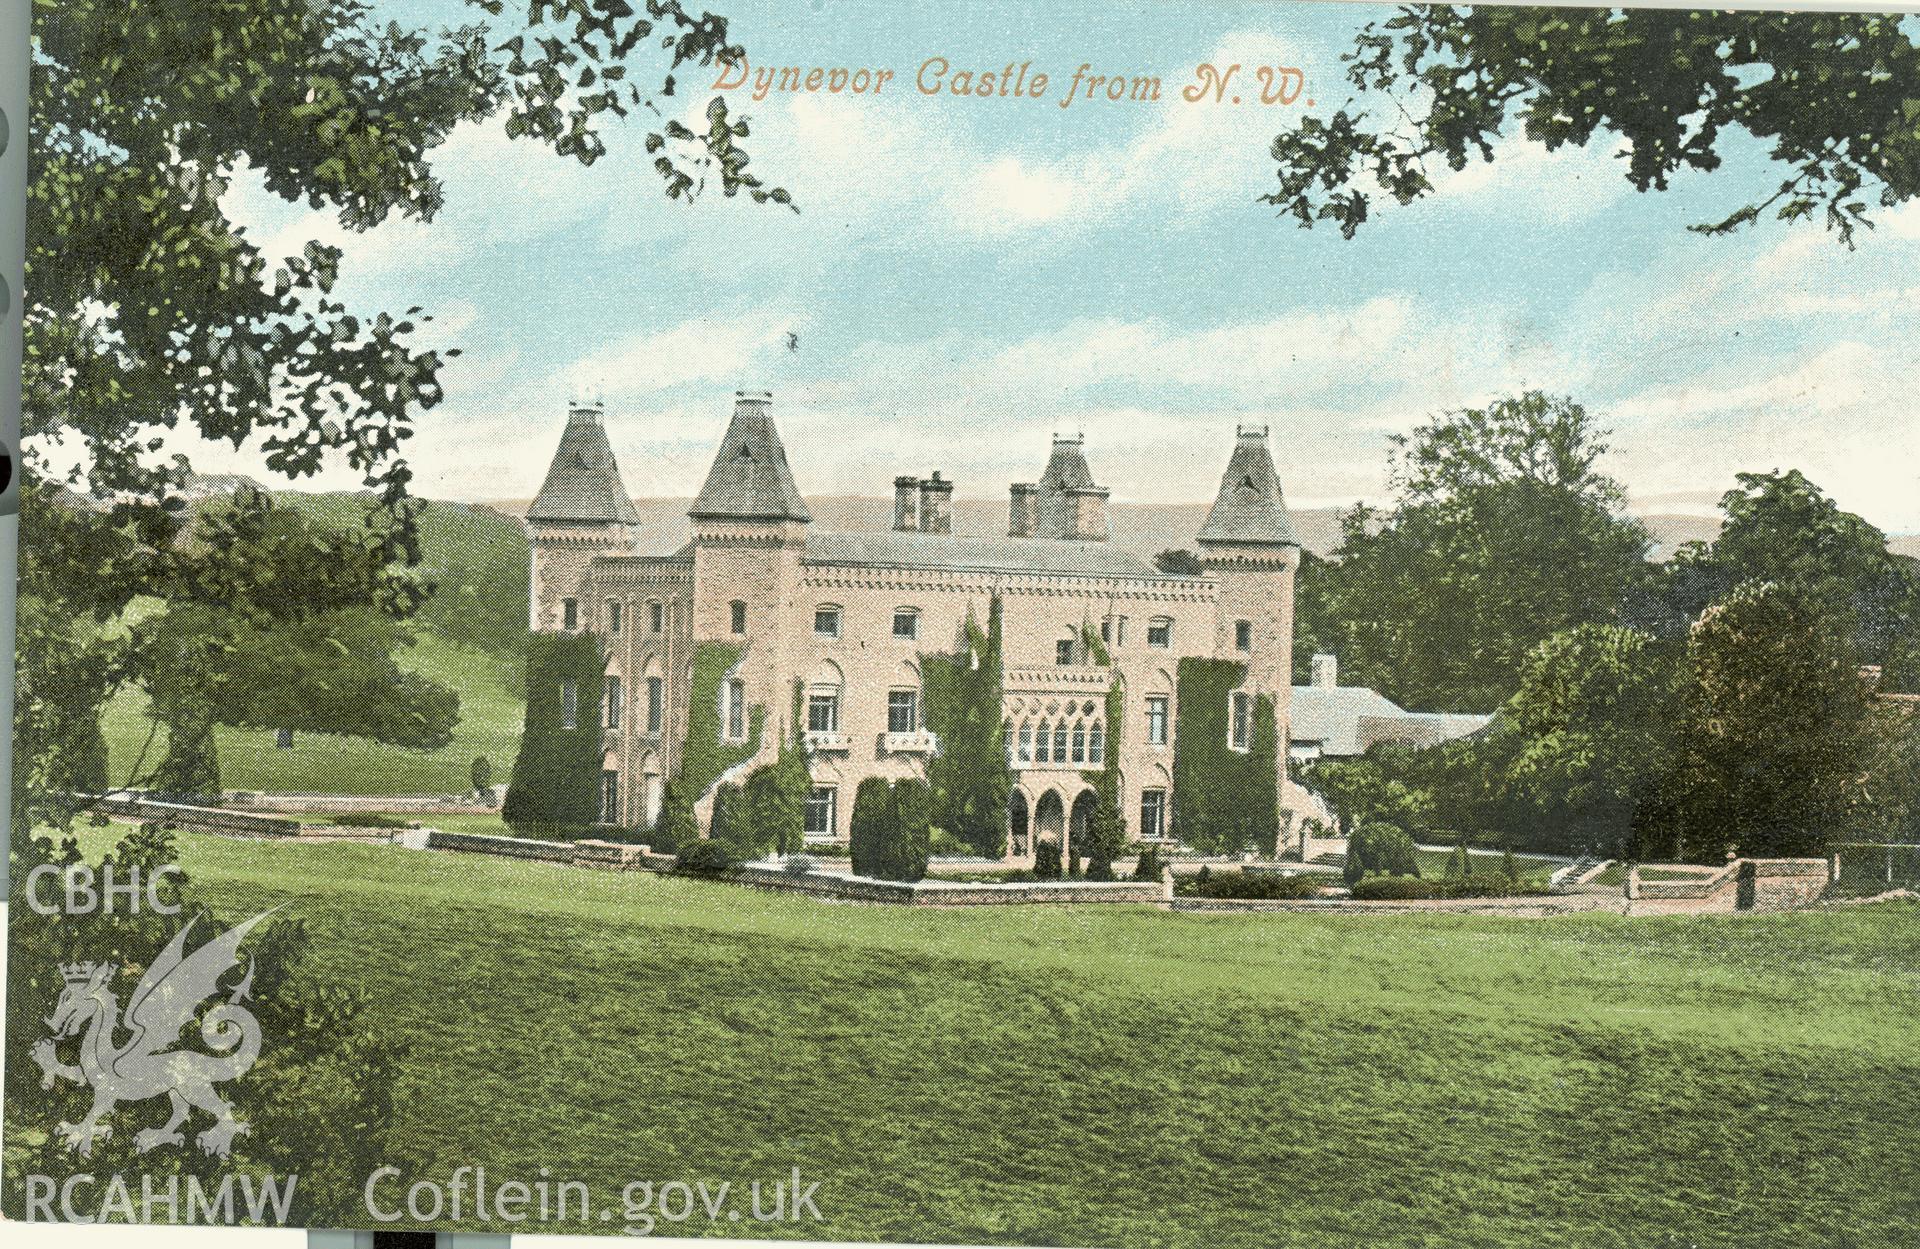 Digitised postcard image of Newton House, Llandeilo. Produced by Parks and Gardens Data Services, from an original item in the Peter Davis Collection at Parks and Gardens UK. We hold only web-resolution images of this collection, suitable for viewing on screen and for research purposes only. We do not hold the original images, or publication quality scans.